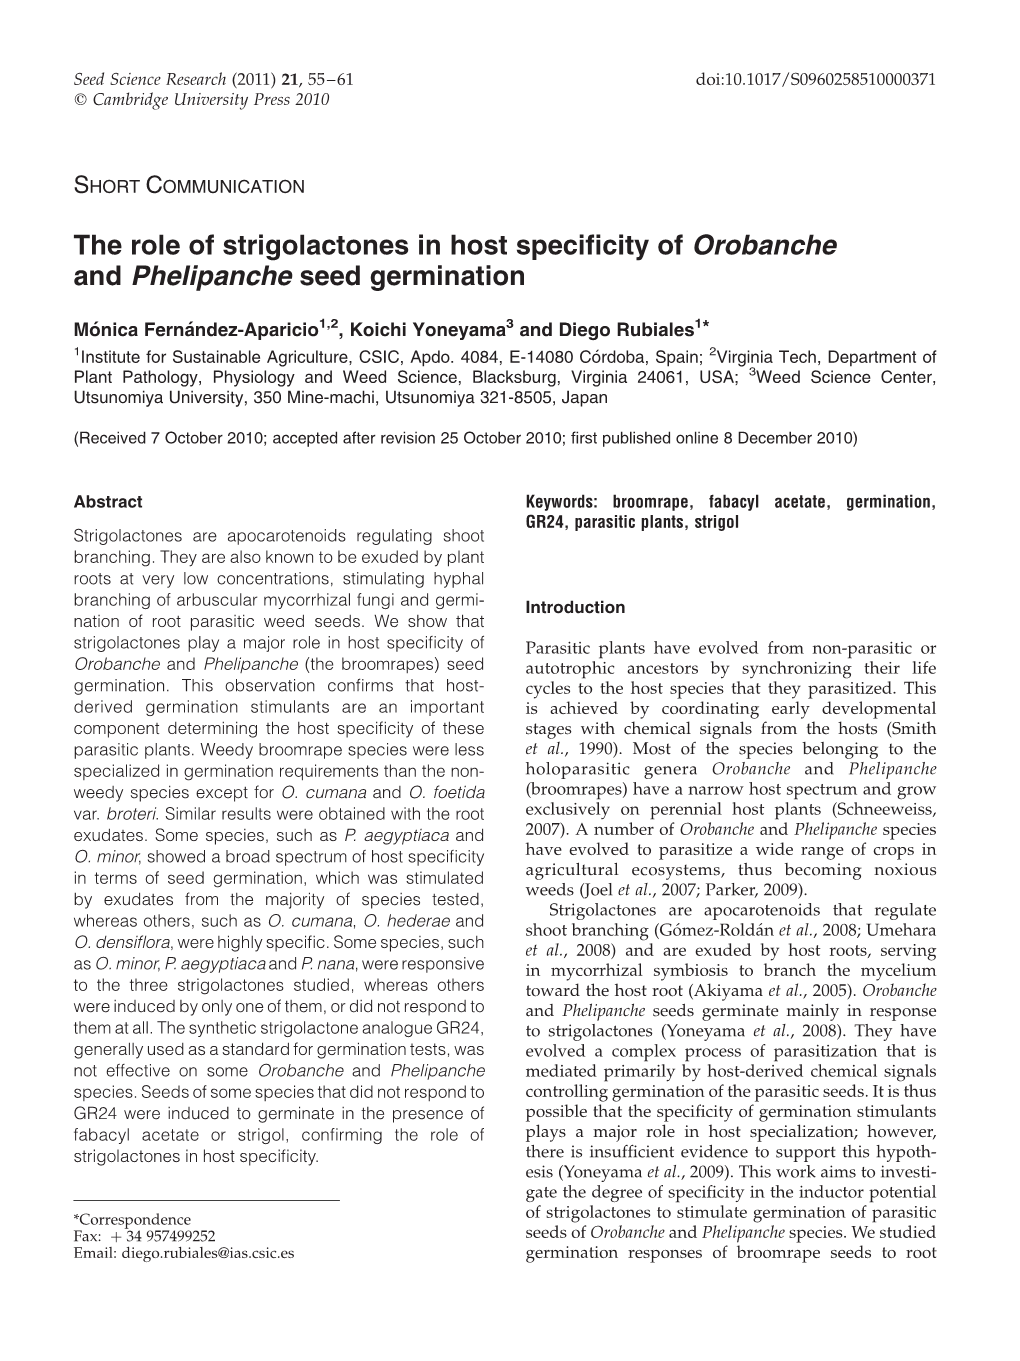 The Role of Strigolactones in Host Specificity of Orobanche And